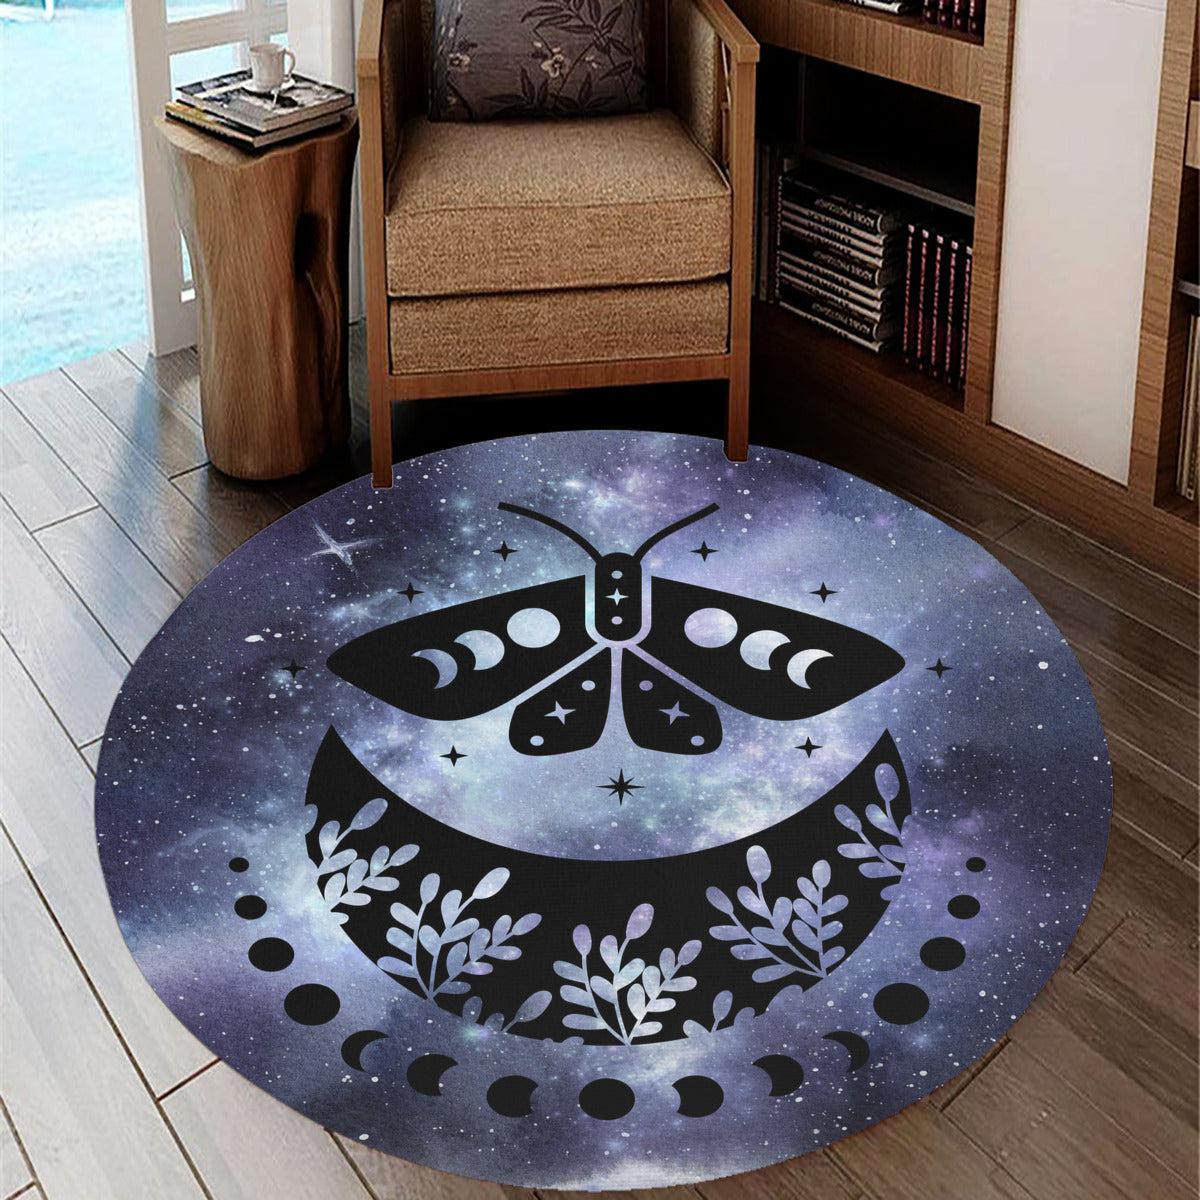 Butterfly moon Round Rug-MoonChildWorld